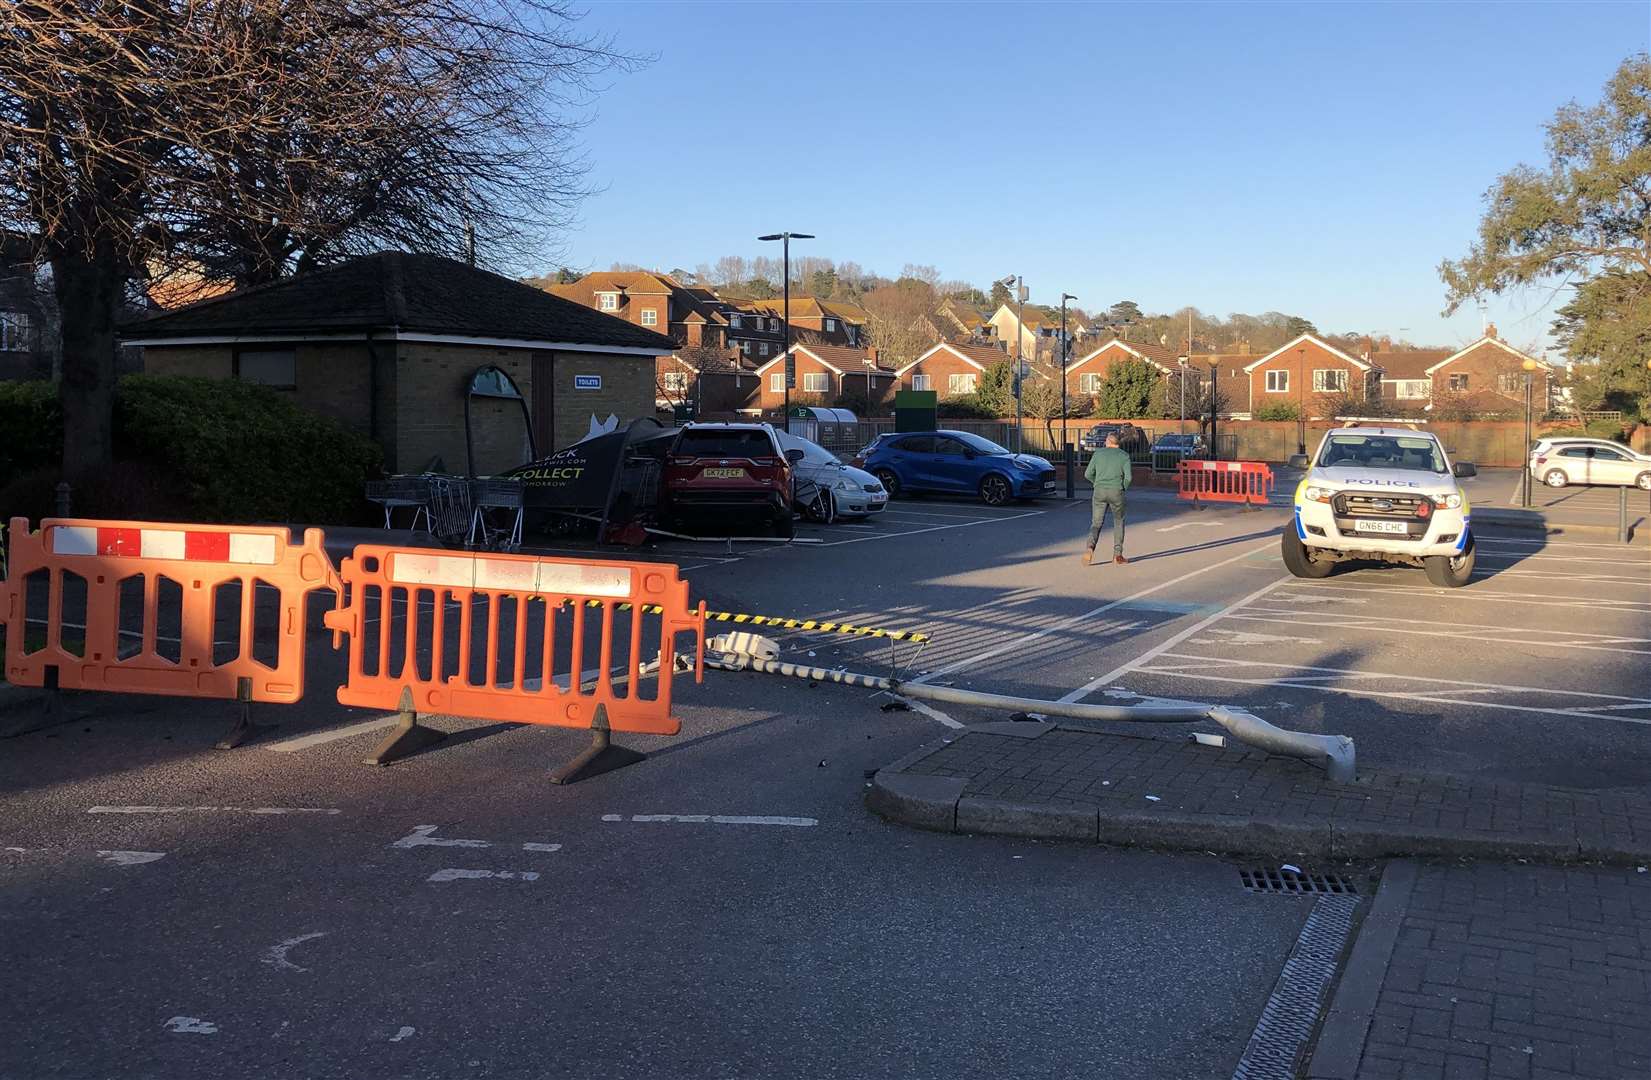 Police are at the scene outside Waitrose in Hythe. Picture: Ollie Leonard